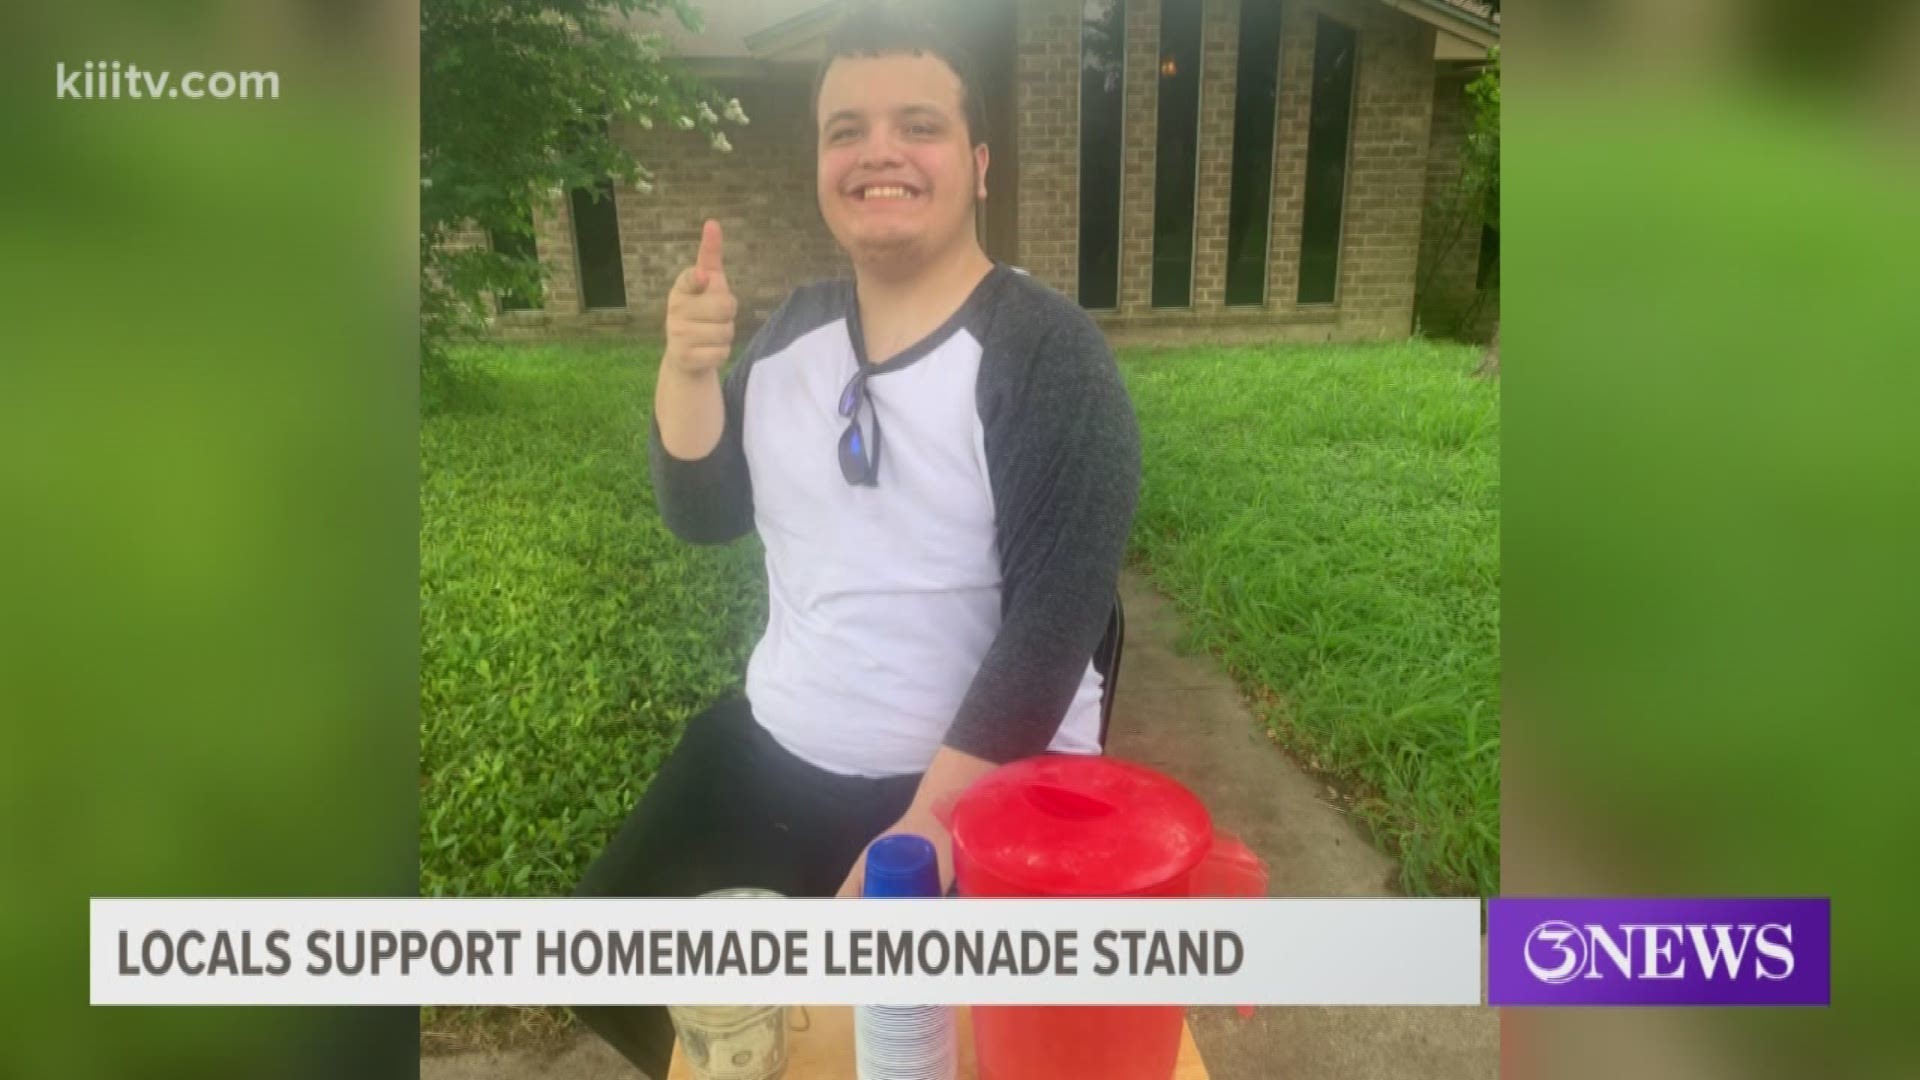 Duarte says her brother is autistic and wanted to start a lemonade stand to raise money so he could buy some modeling clay, which he uses for personal-therapy.